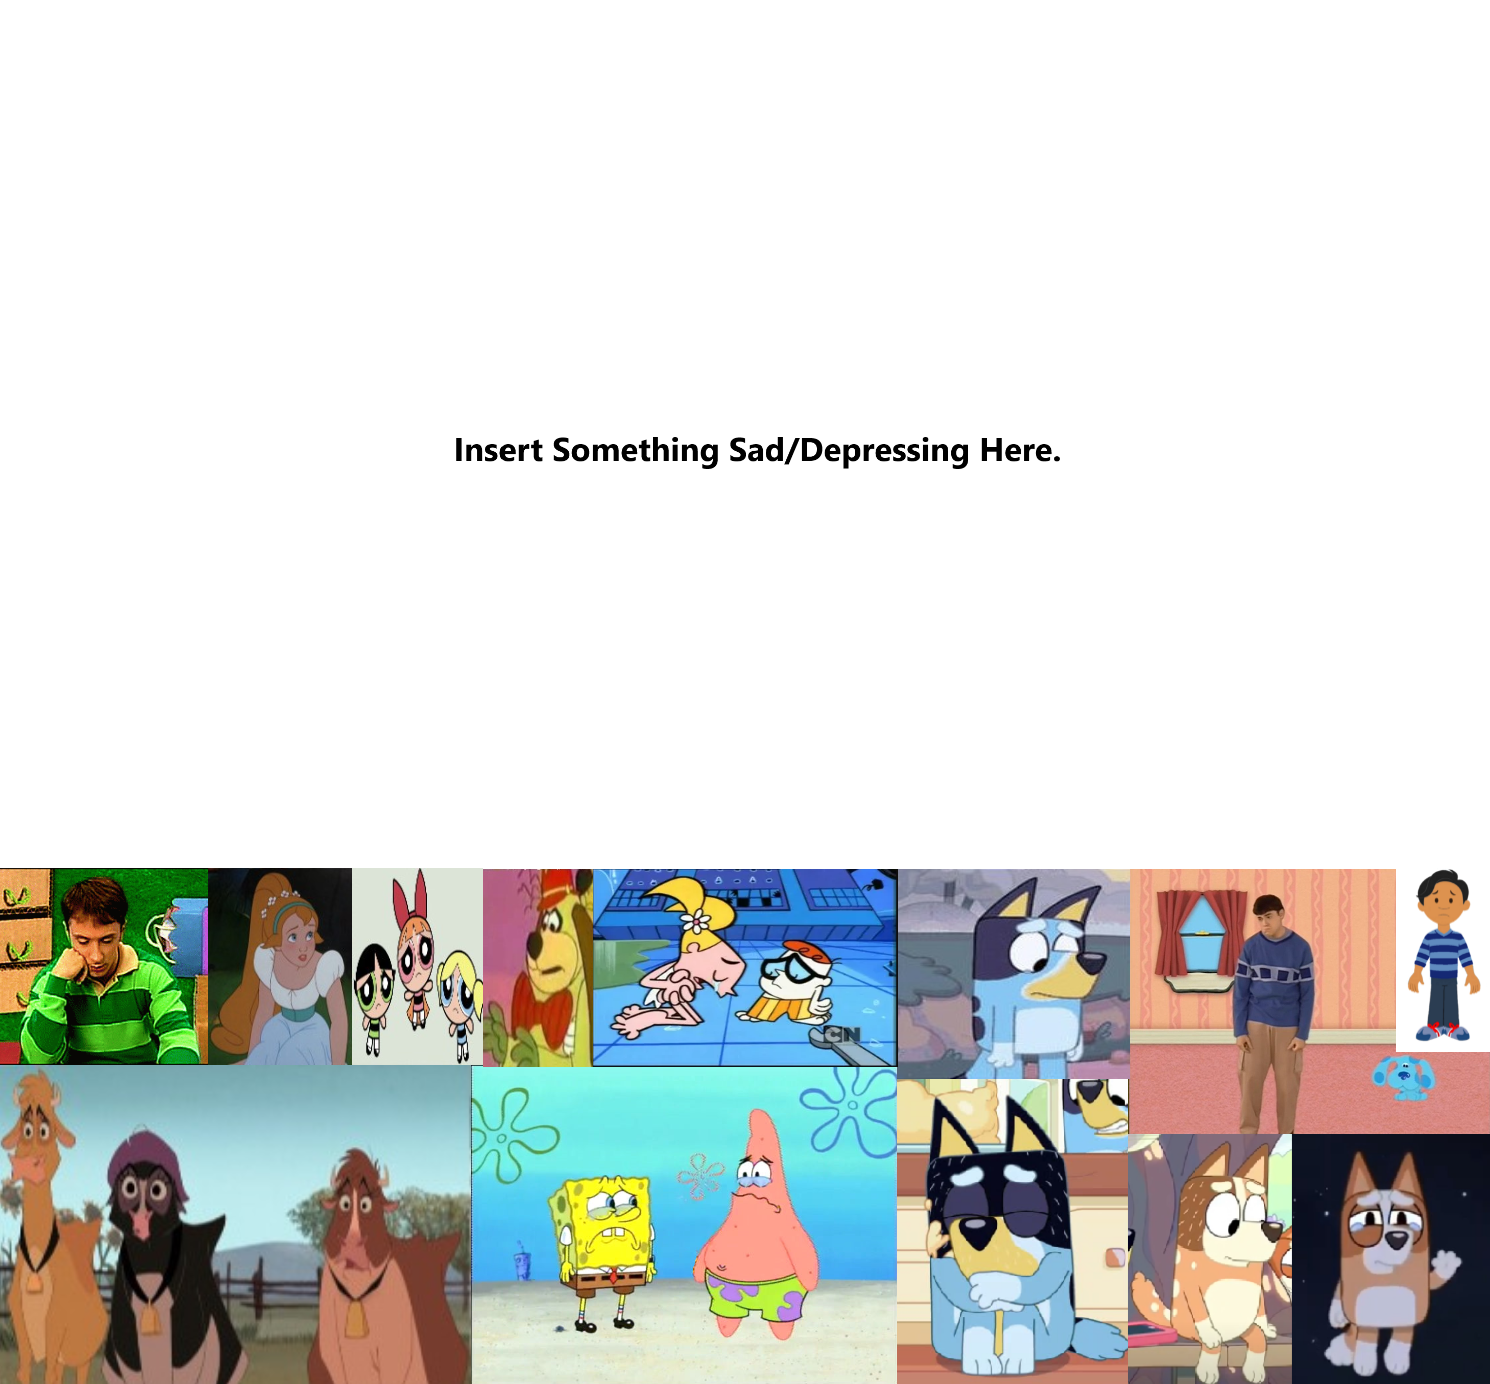 Team Bluey and SpongeBob is Sad at What Meme Blank by stephen0503